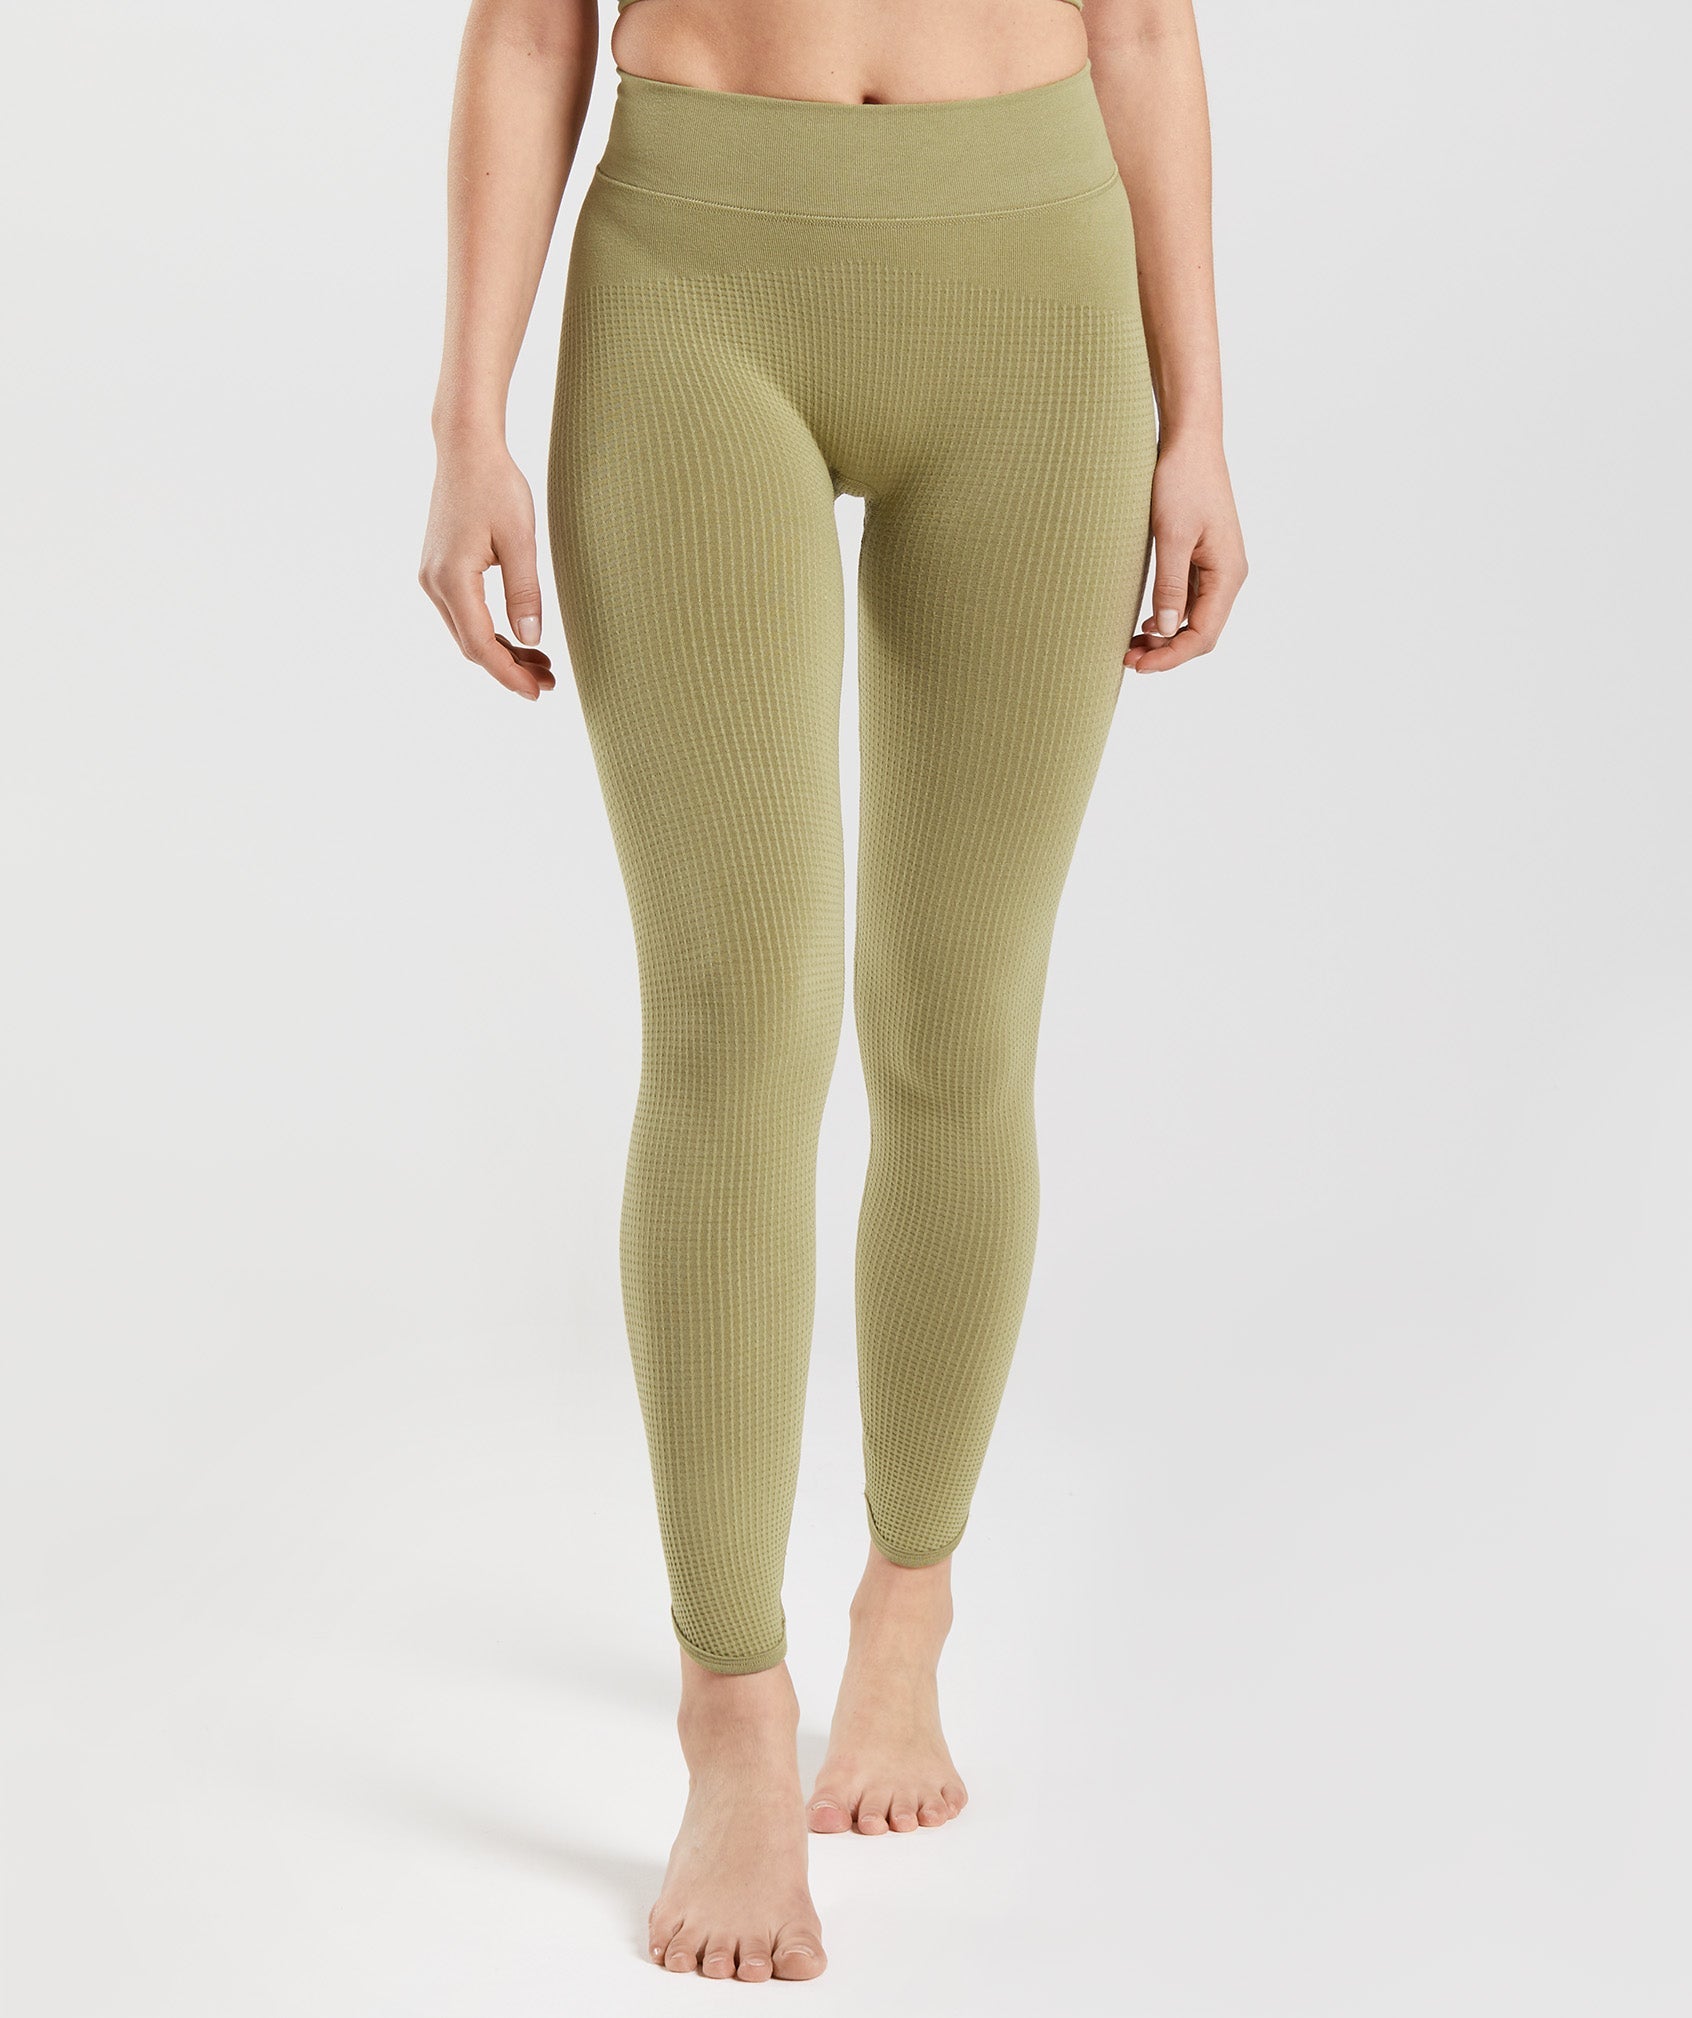 Pause Seamless Leggings in Griffin Green - view 1